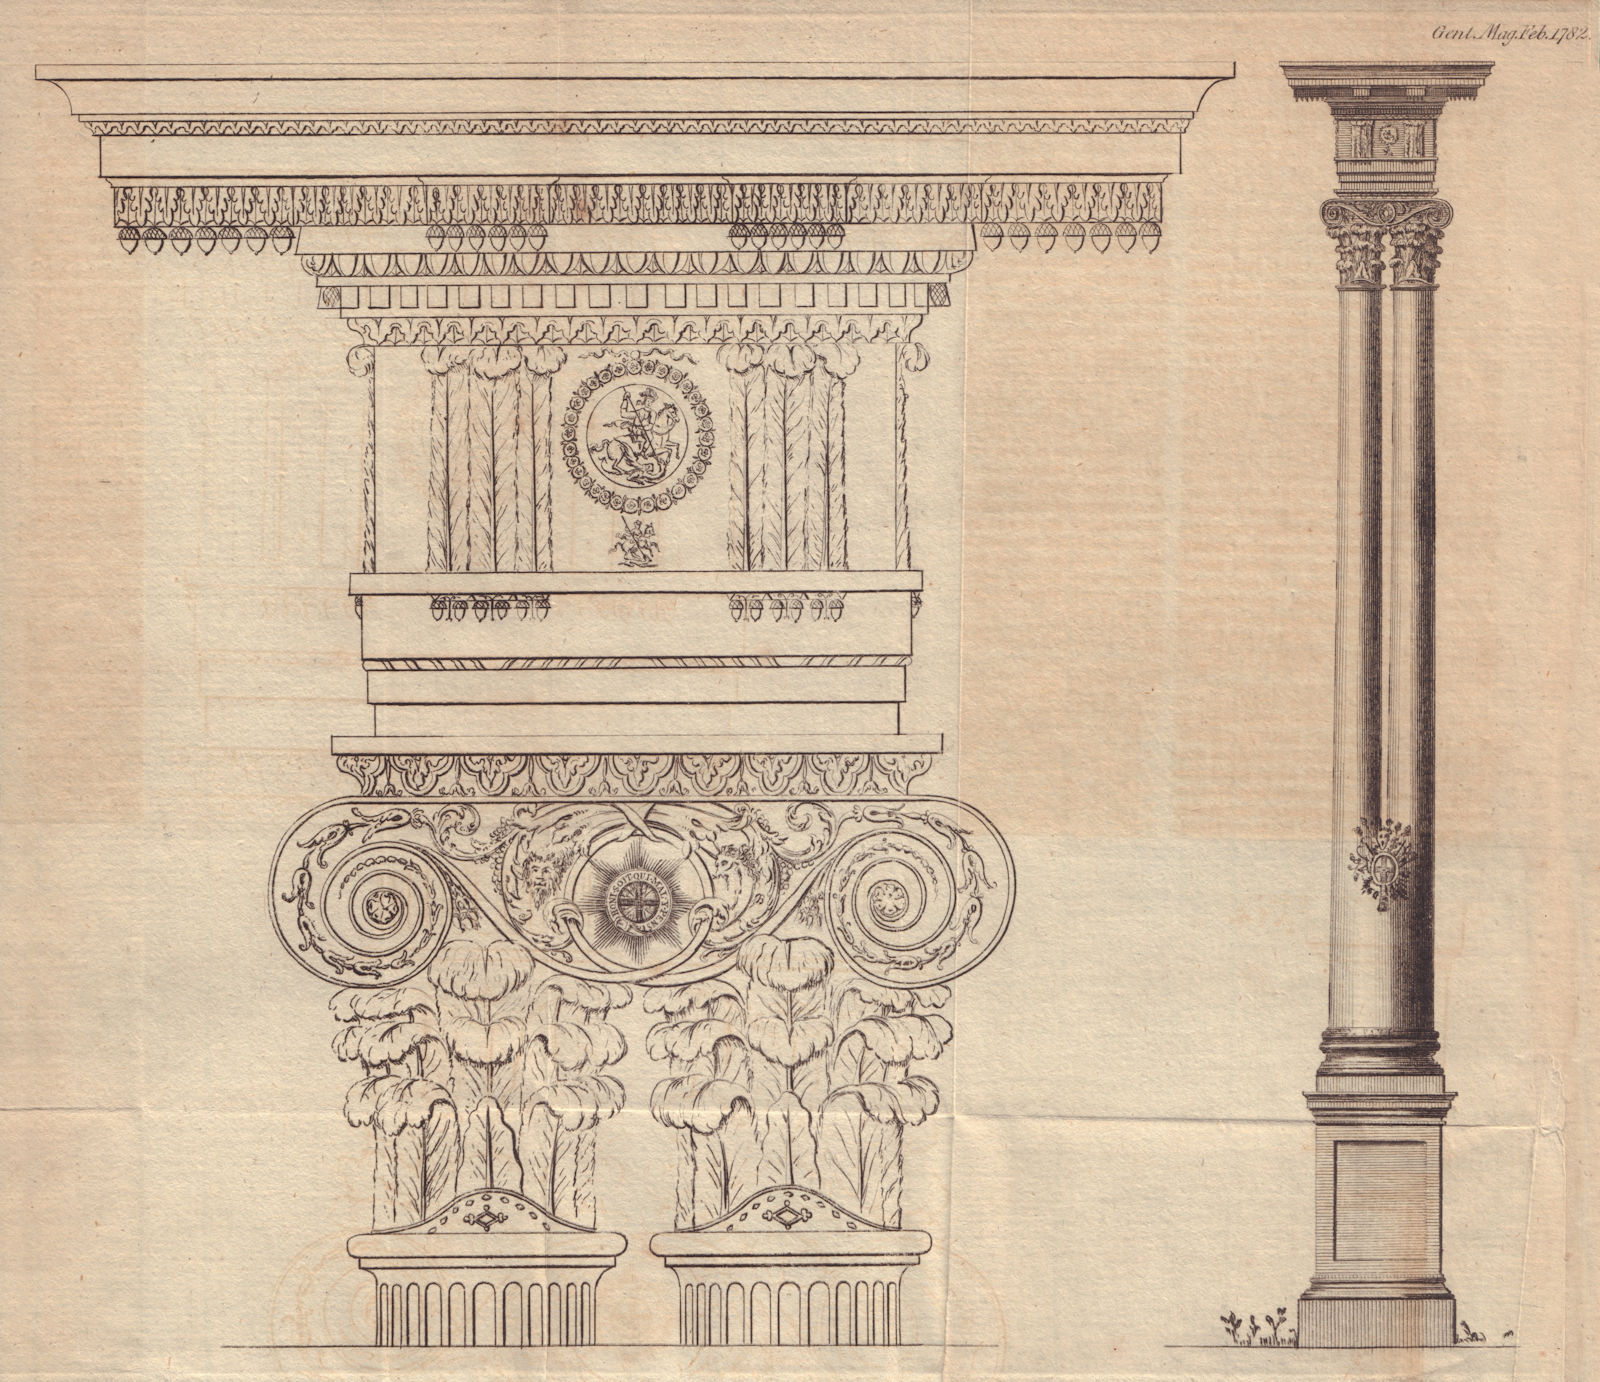 Associate Product Design for a new Order of Architecture, by Emlyn. Decorative column 1782 print